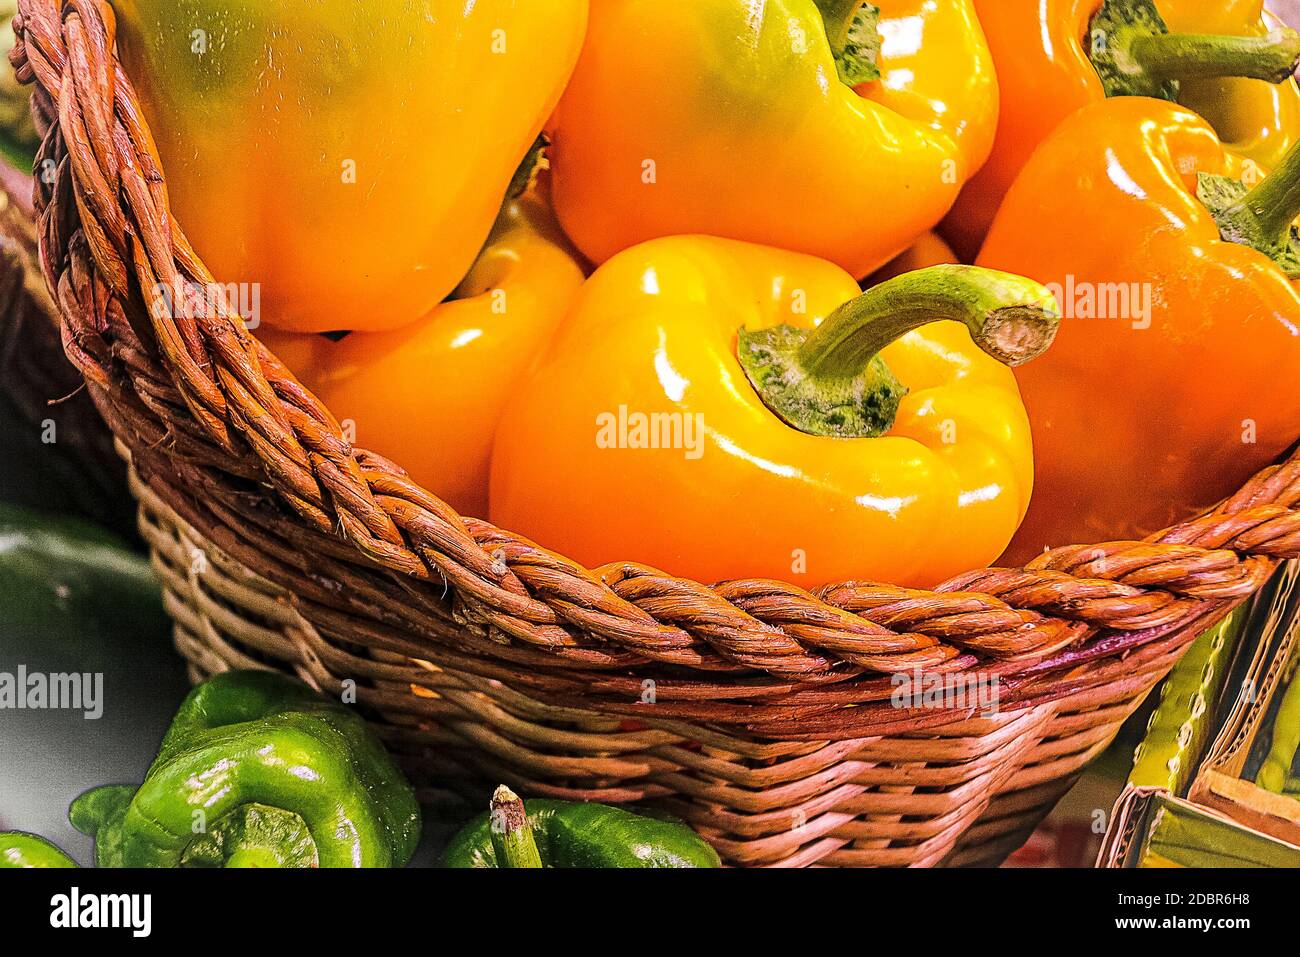 Raw Organic Orange and Yellow Fresh Bell Peppers in red basket Stock Photo